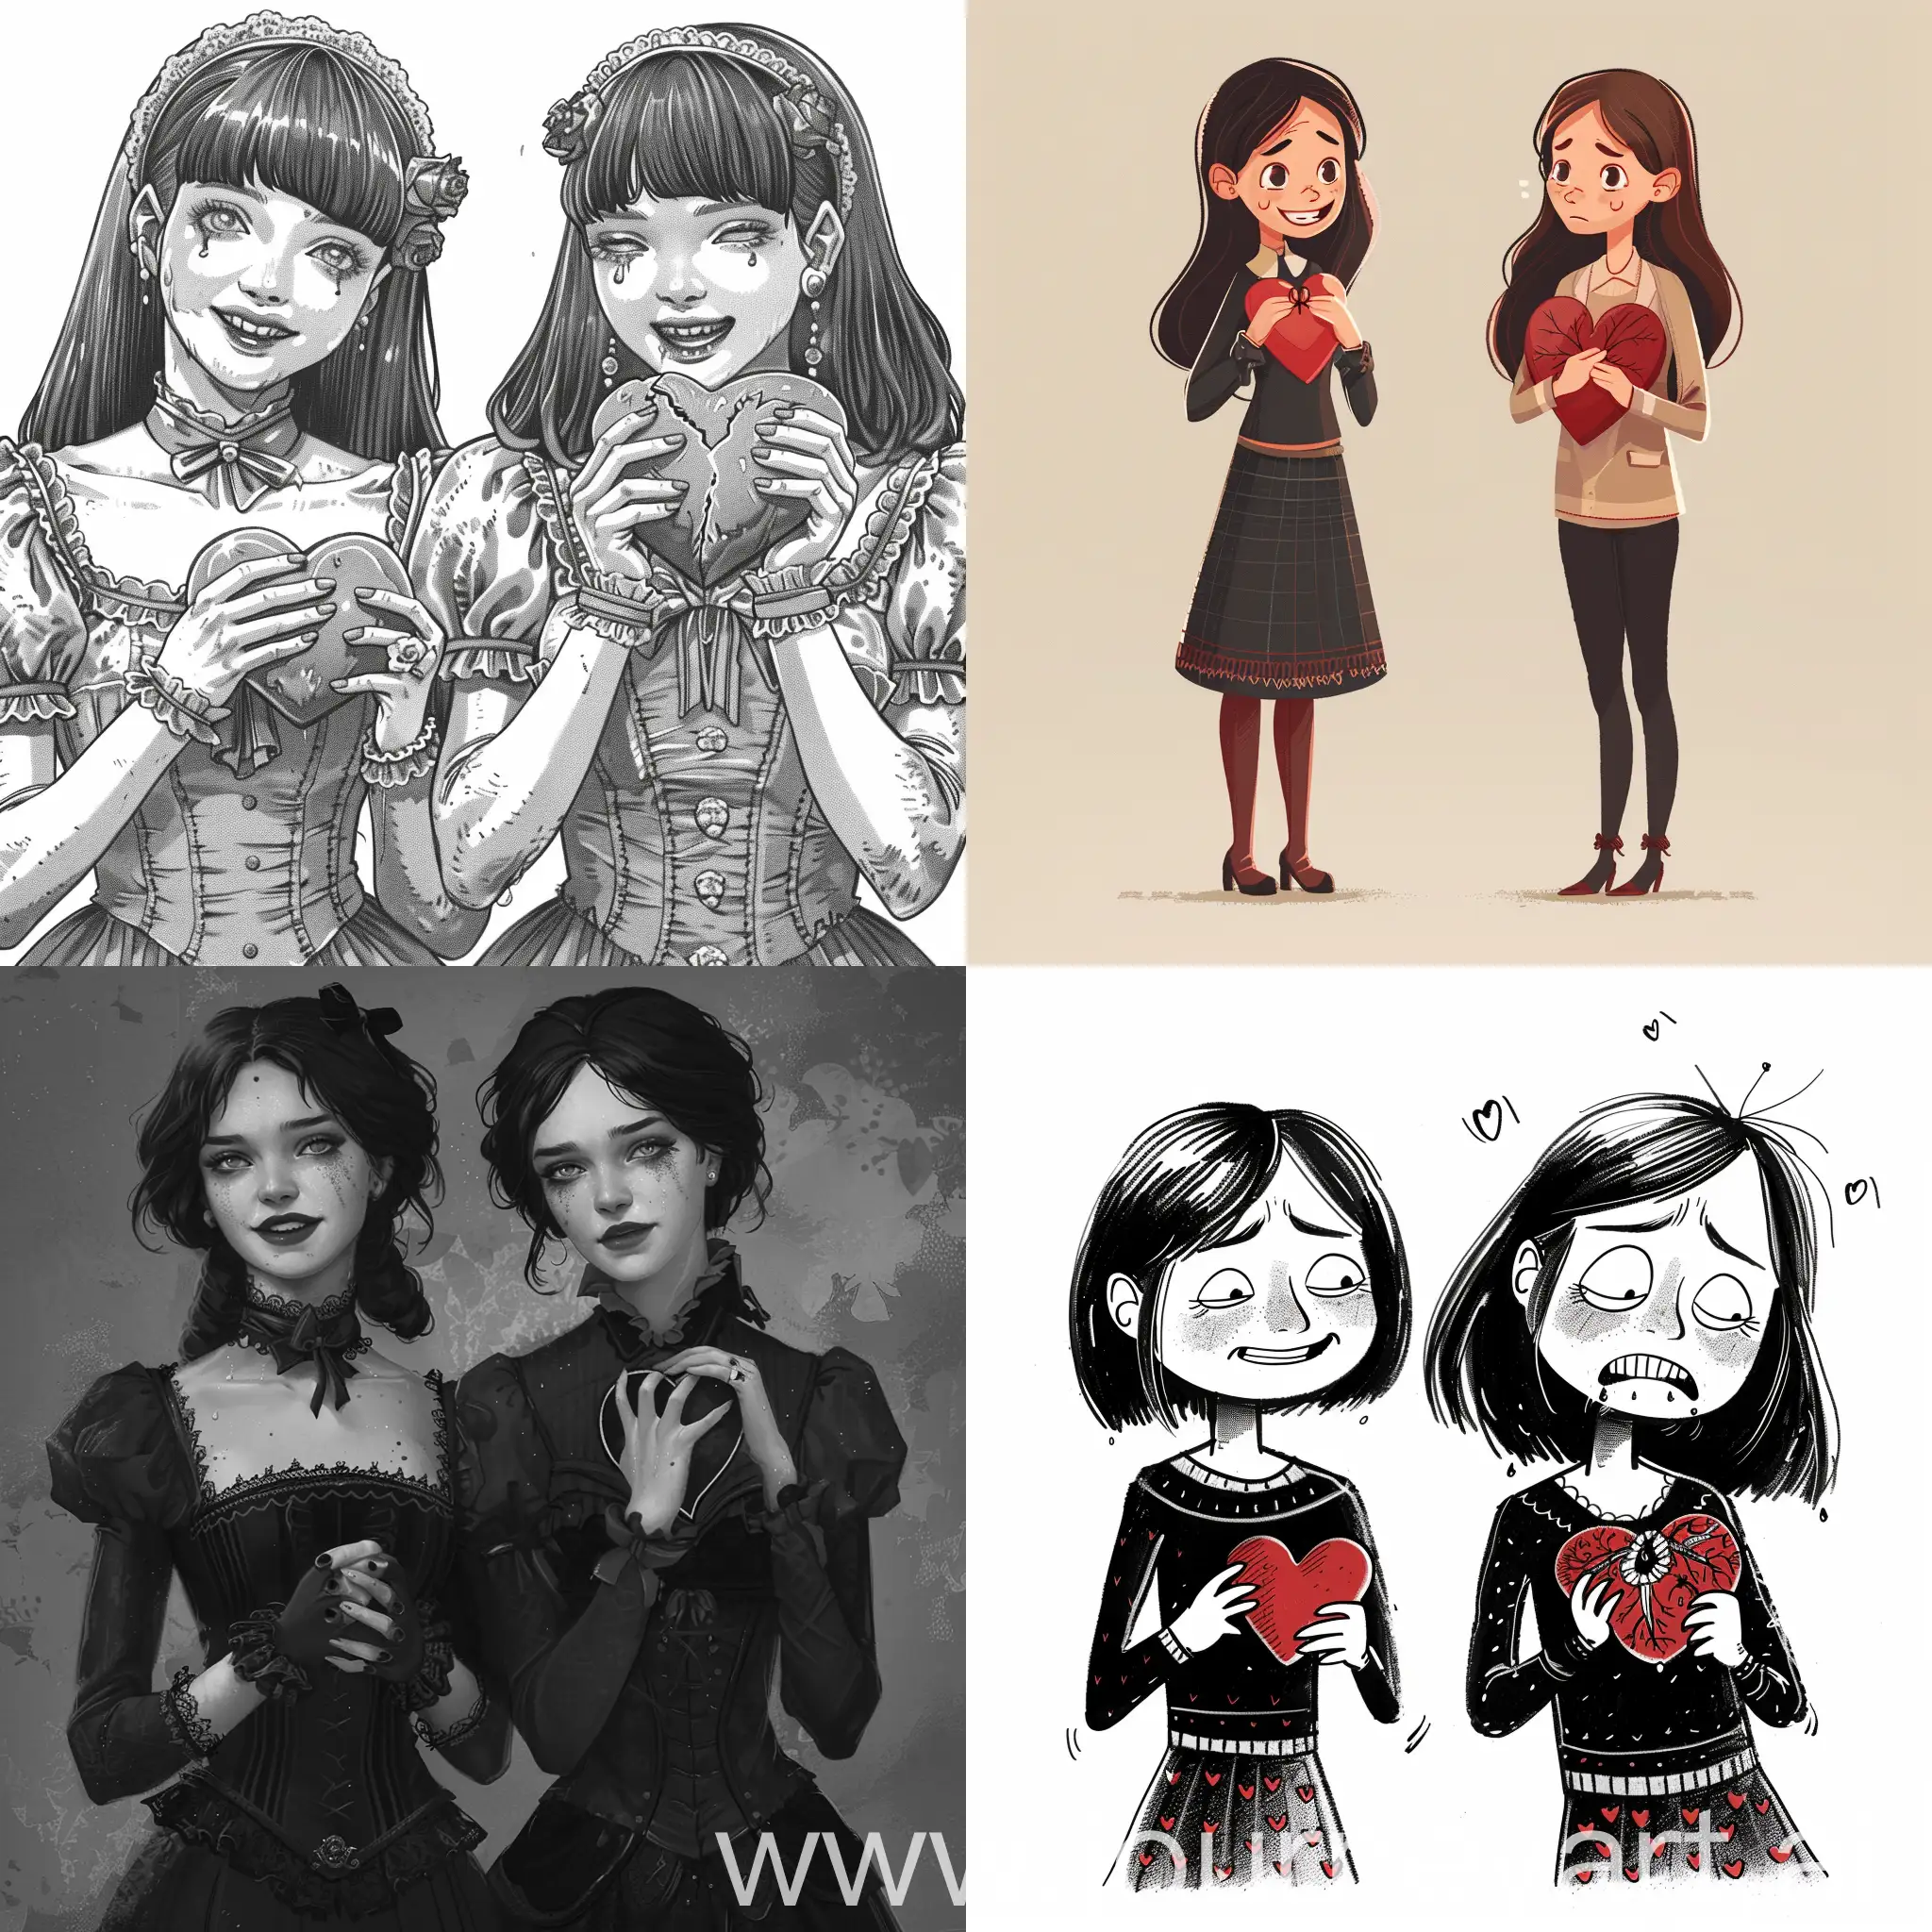 The two women look alike. Wear the same clothes. The woman on the left holds a heart and smiles happily. The woman on the right holds a broken heart and cries.